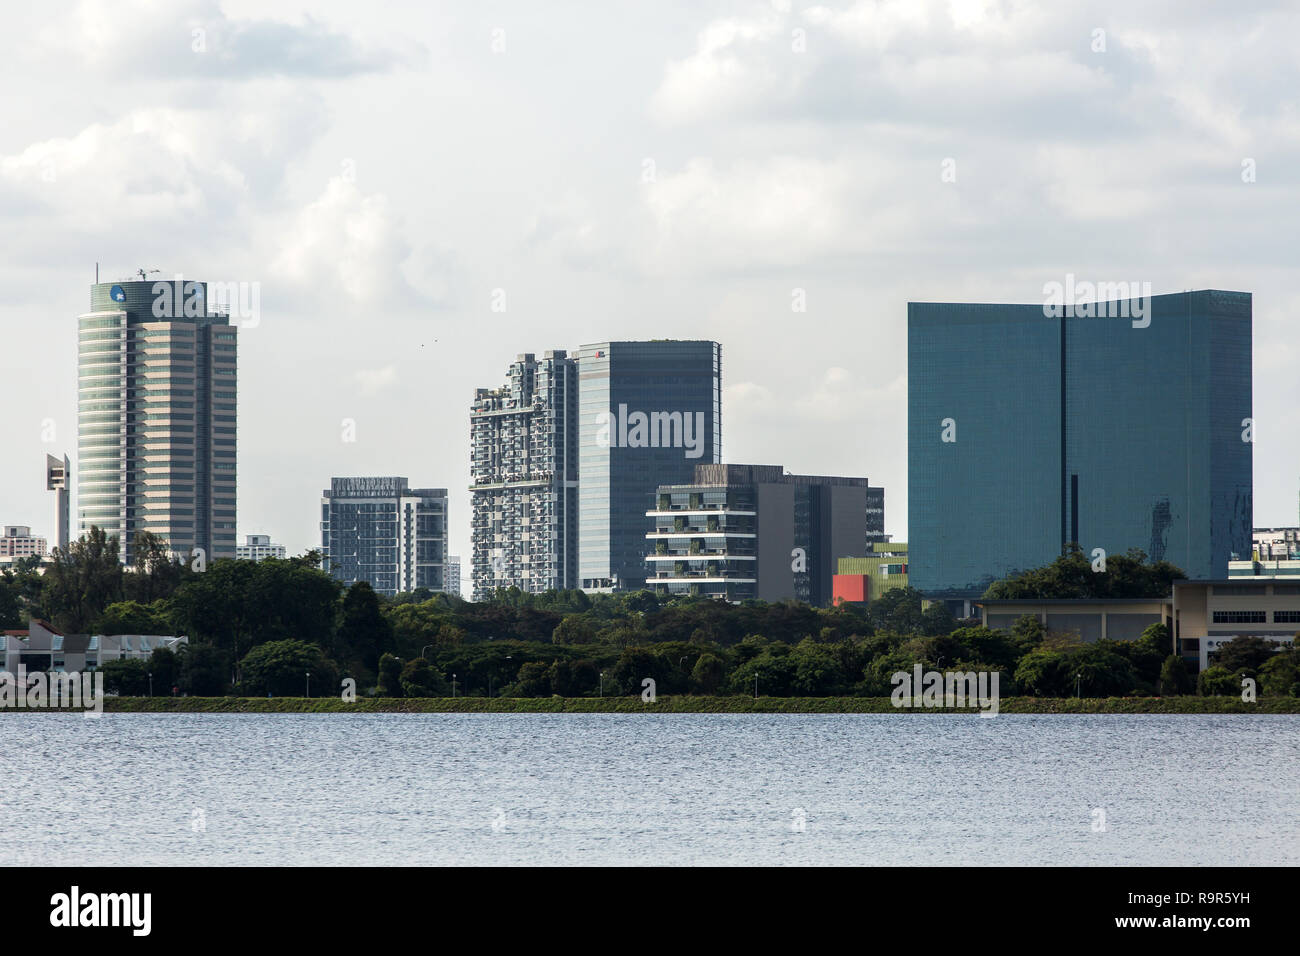 View of Jurong East from Pandan Reservoir. Consists of commercial buildings such as shopping malls, hospital, hotel and residential, Singapore. Stock Photo